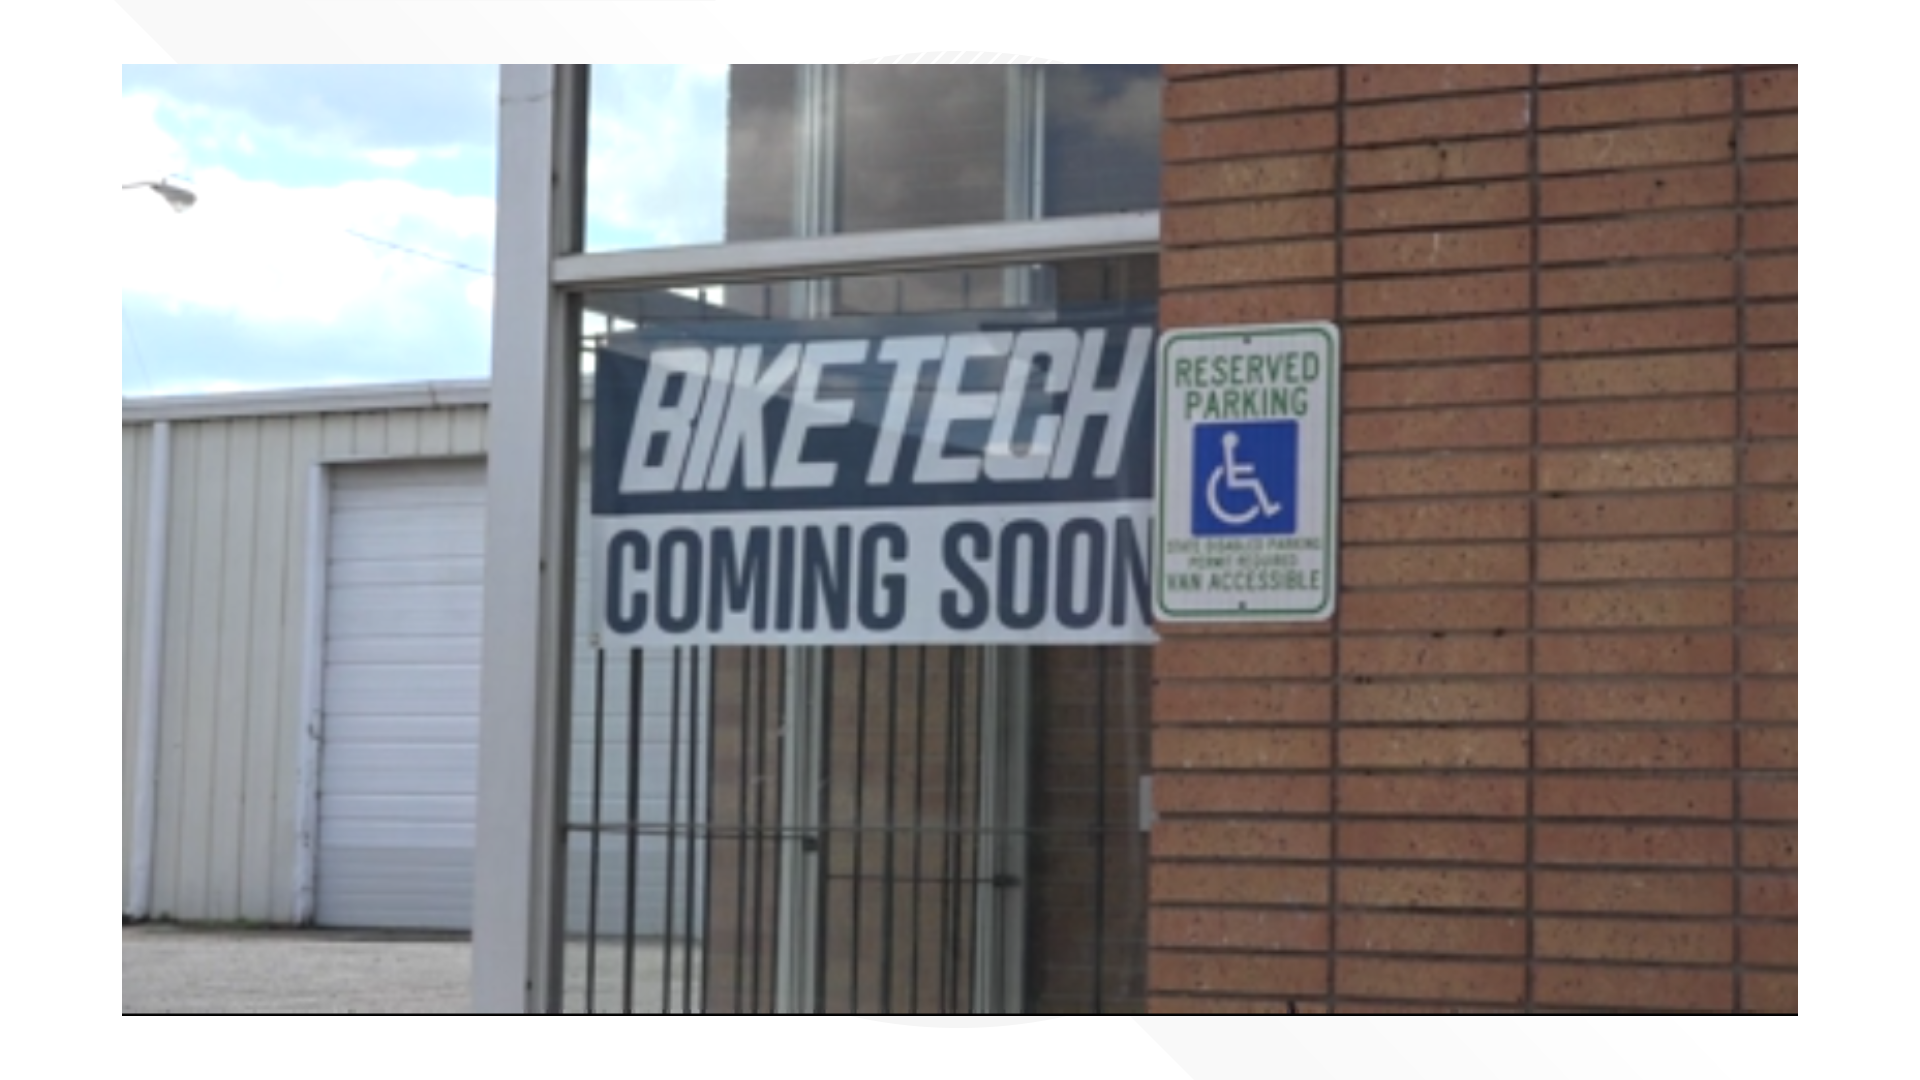 For years, people have driven past the big Bike Tech sign along Vineville Avenue. Soon, it'll be moving to a new spot downtown.